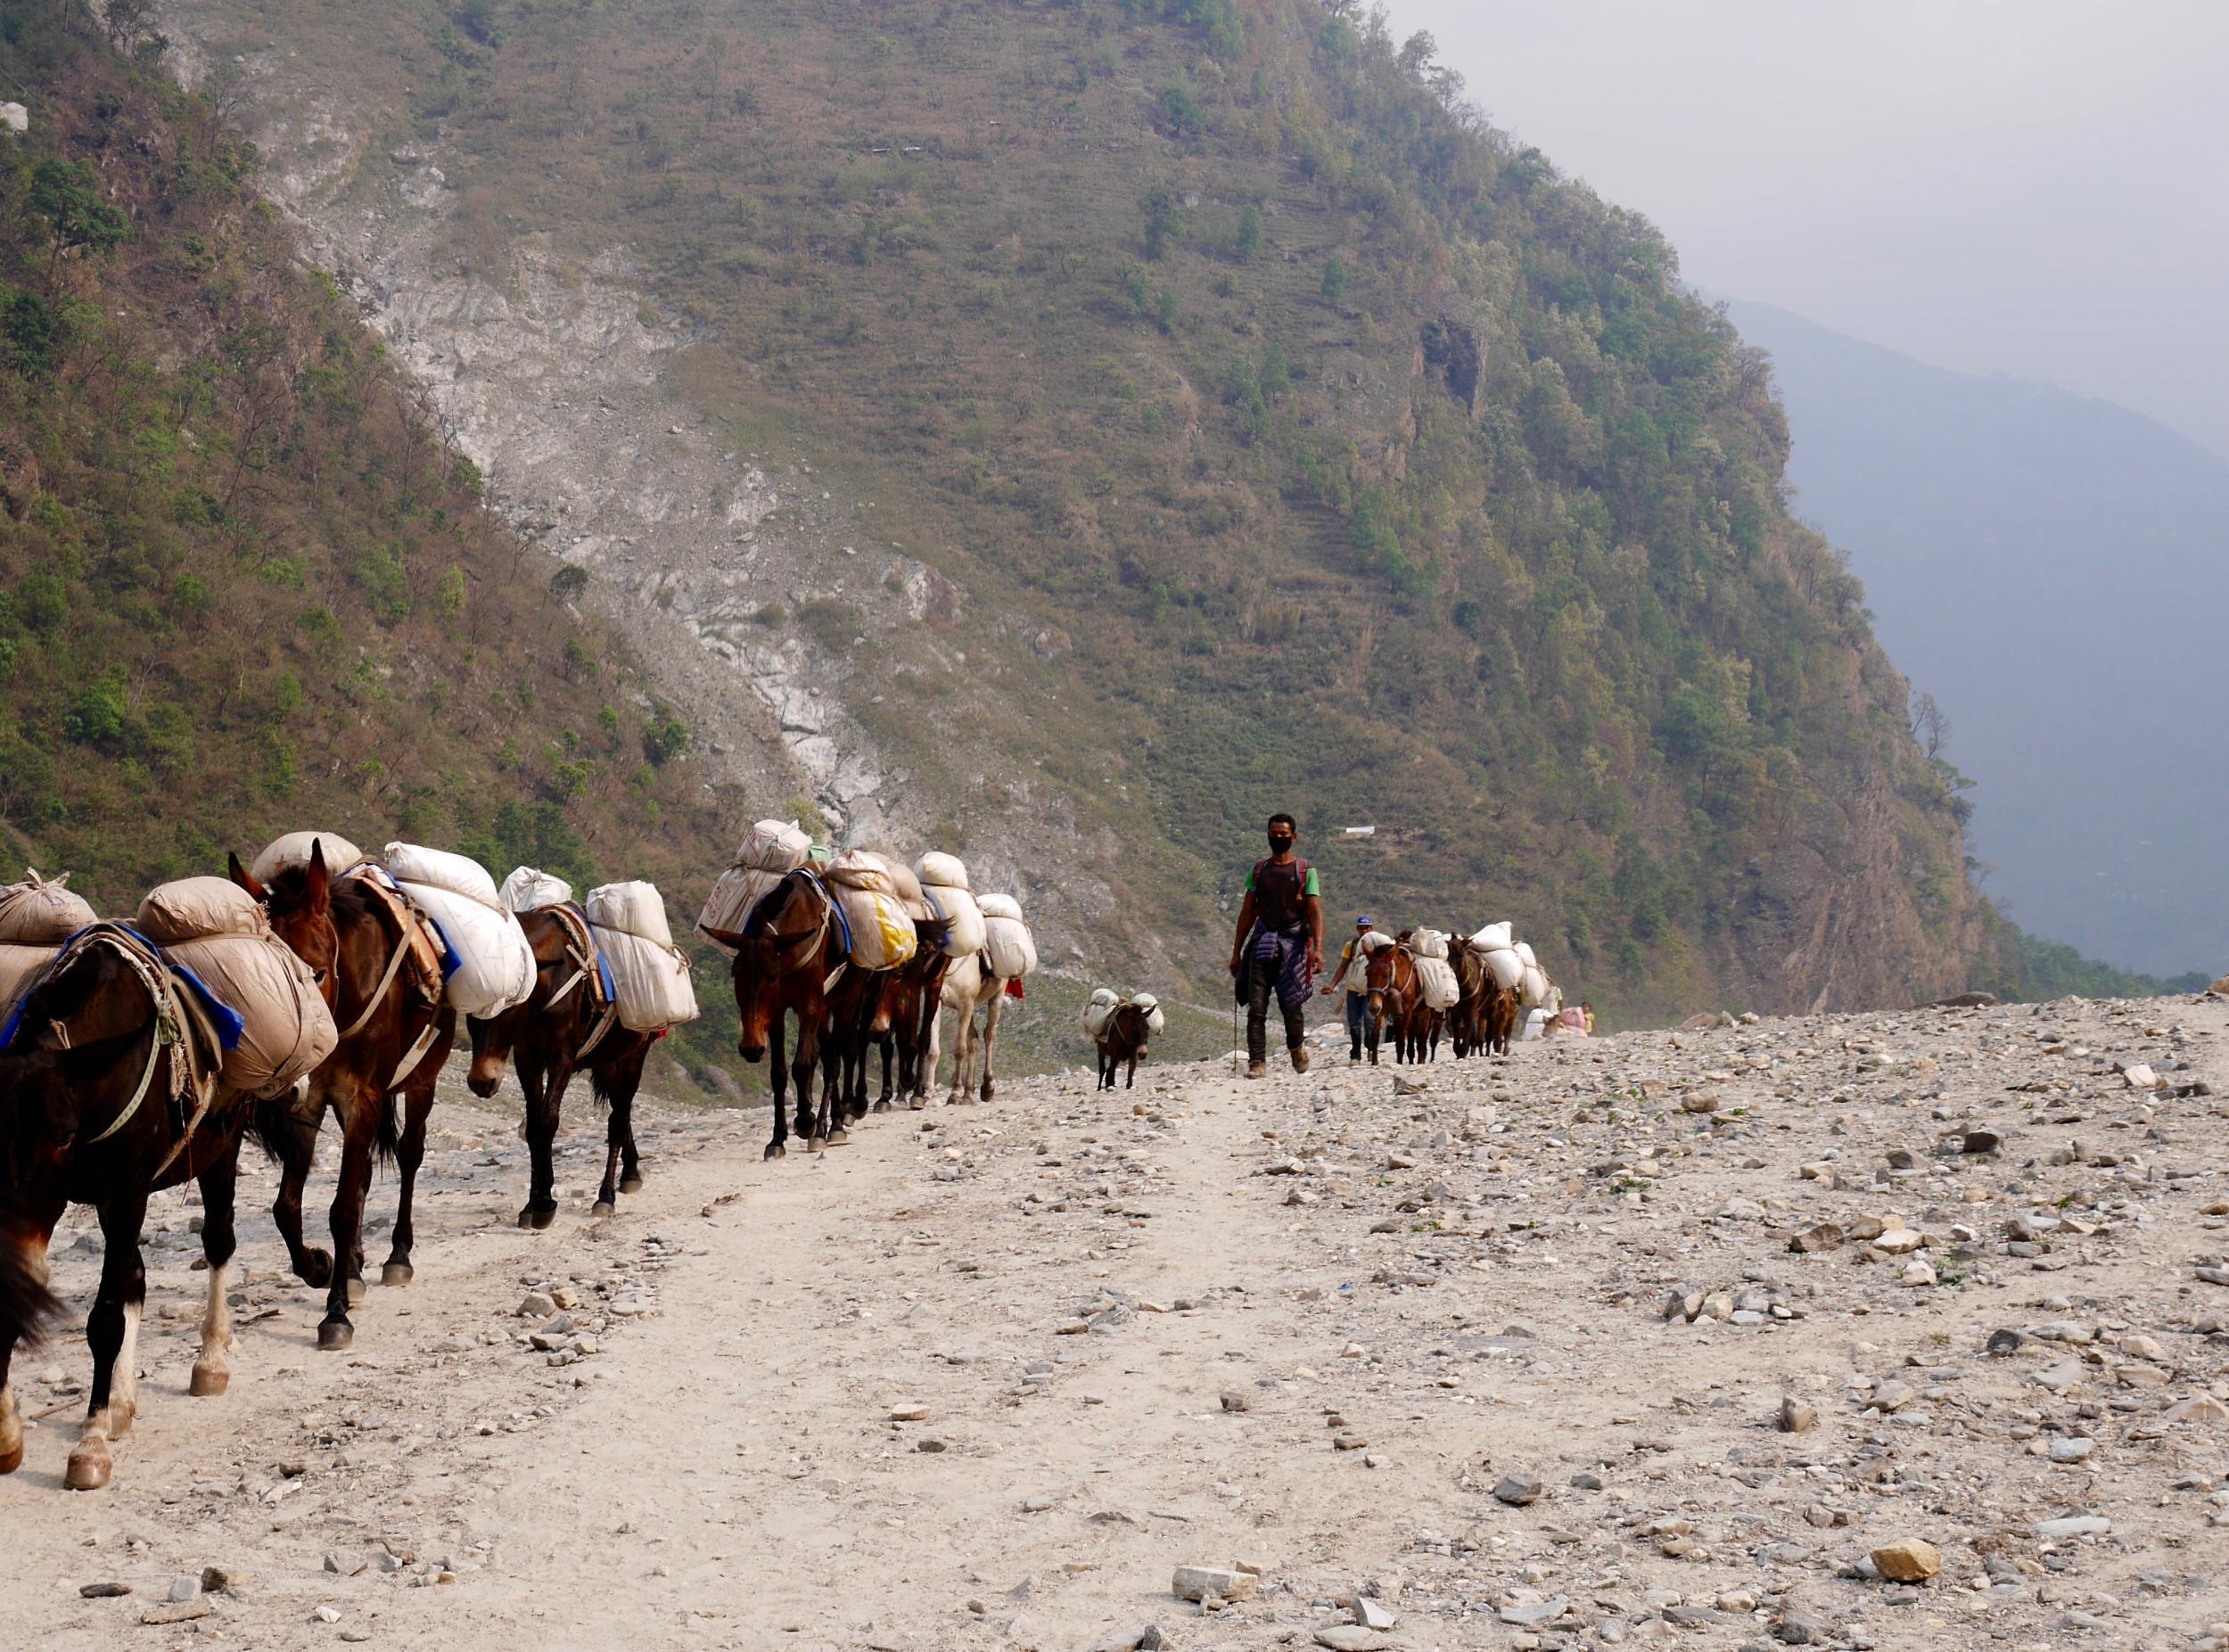 You're more likely to share the trail with a mule than with other hikers